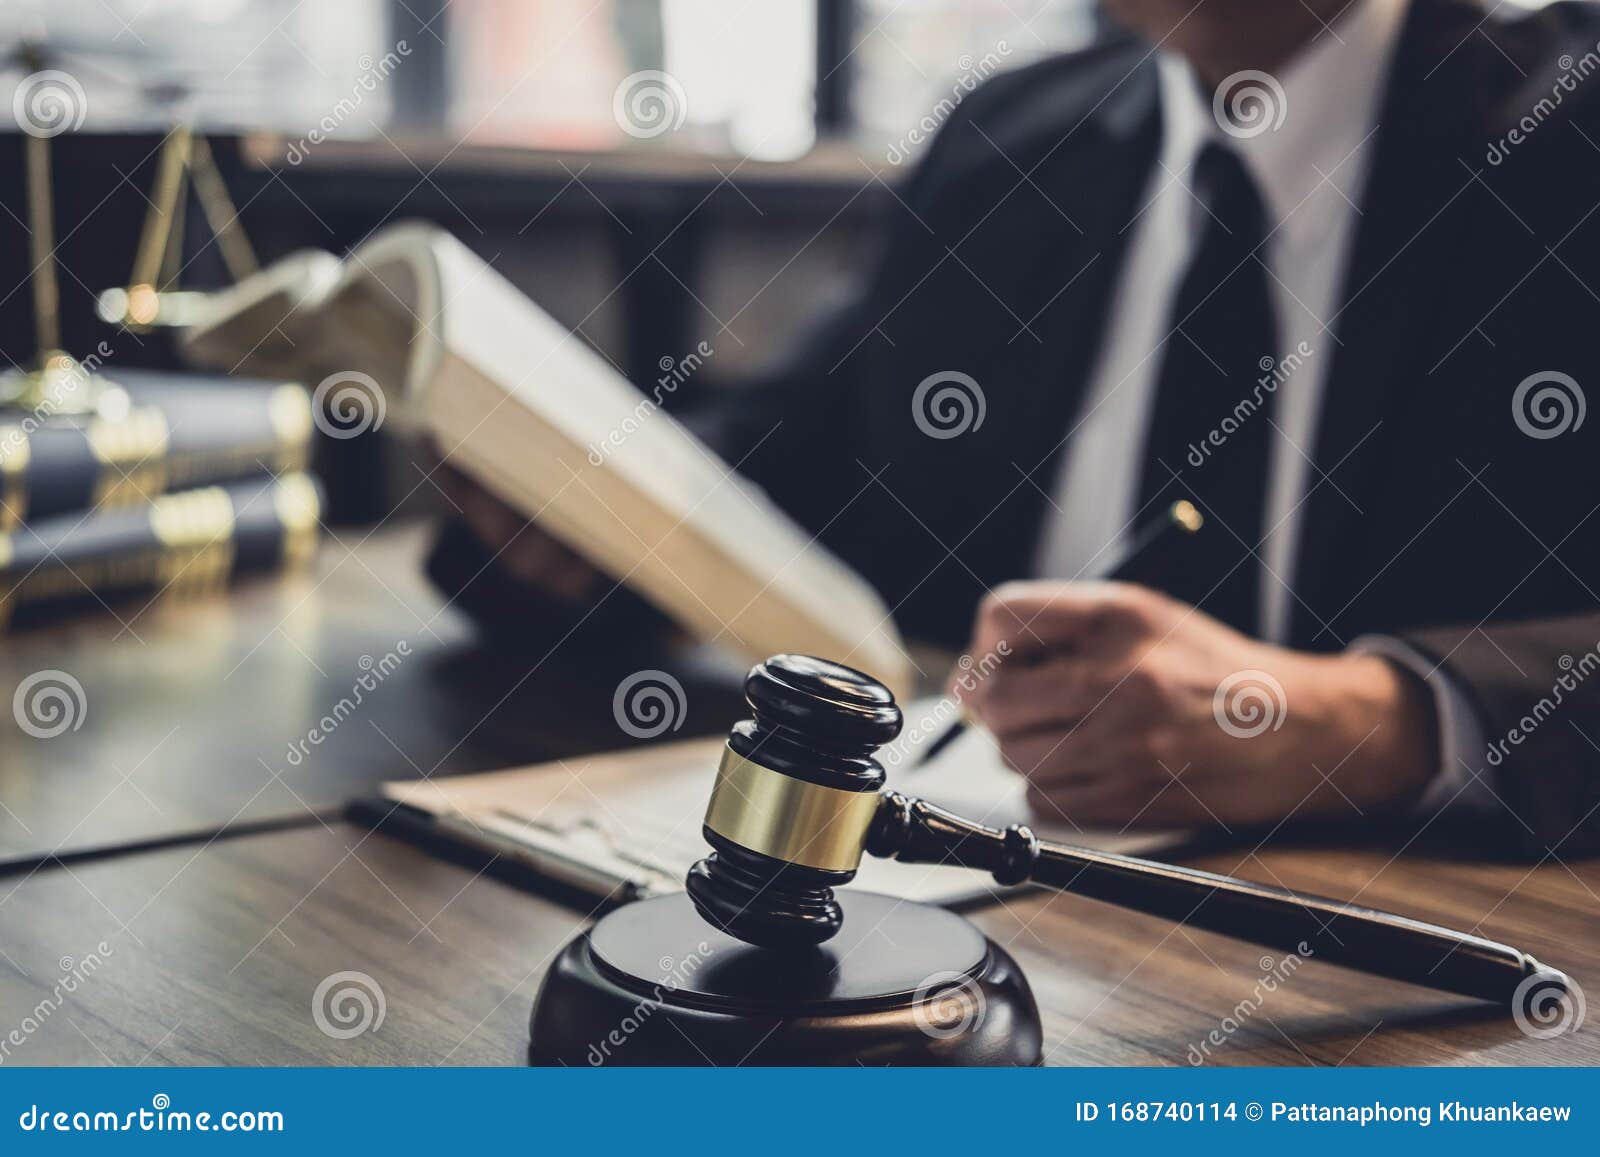 judge gavel with justice lawyers, lawyer or judge counselor working with agreement contract in courtroom, justice and law concept